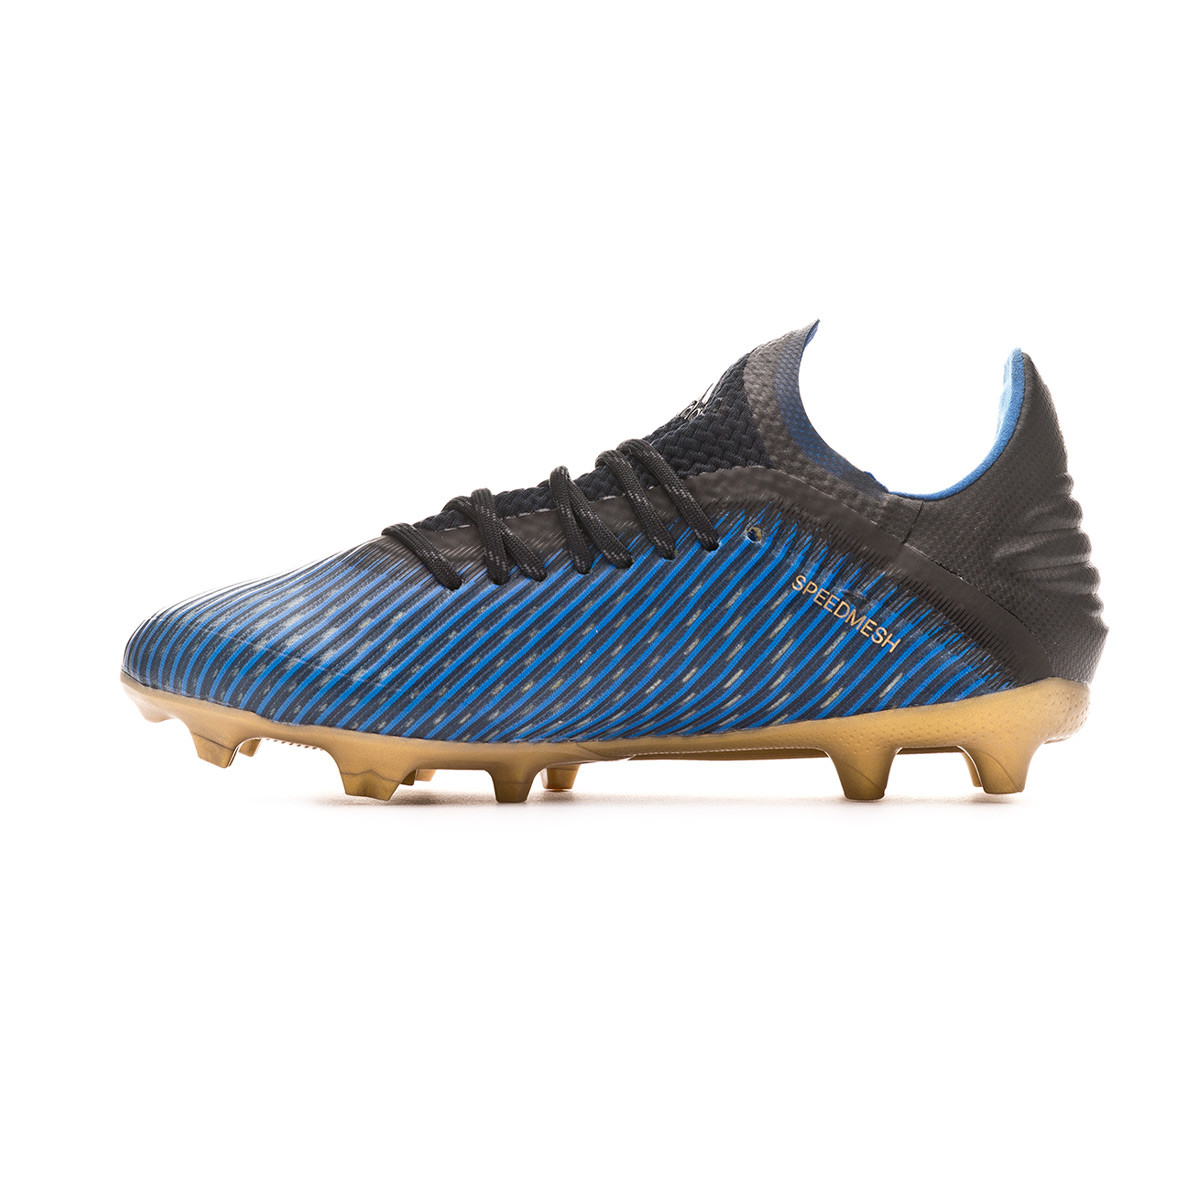 adidas x 19.1 blue and gold